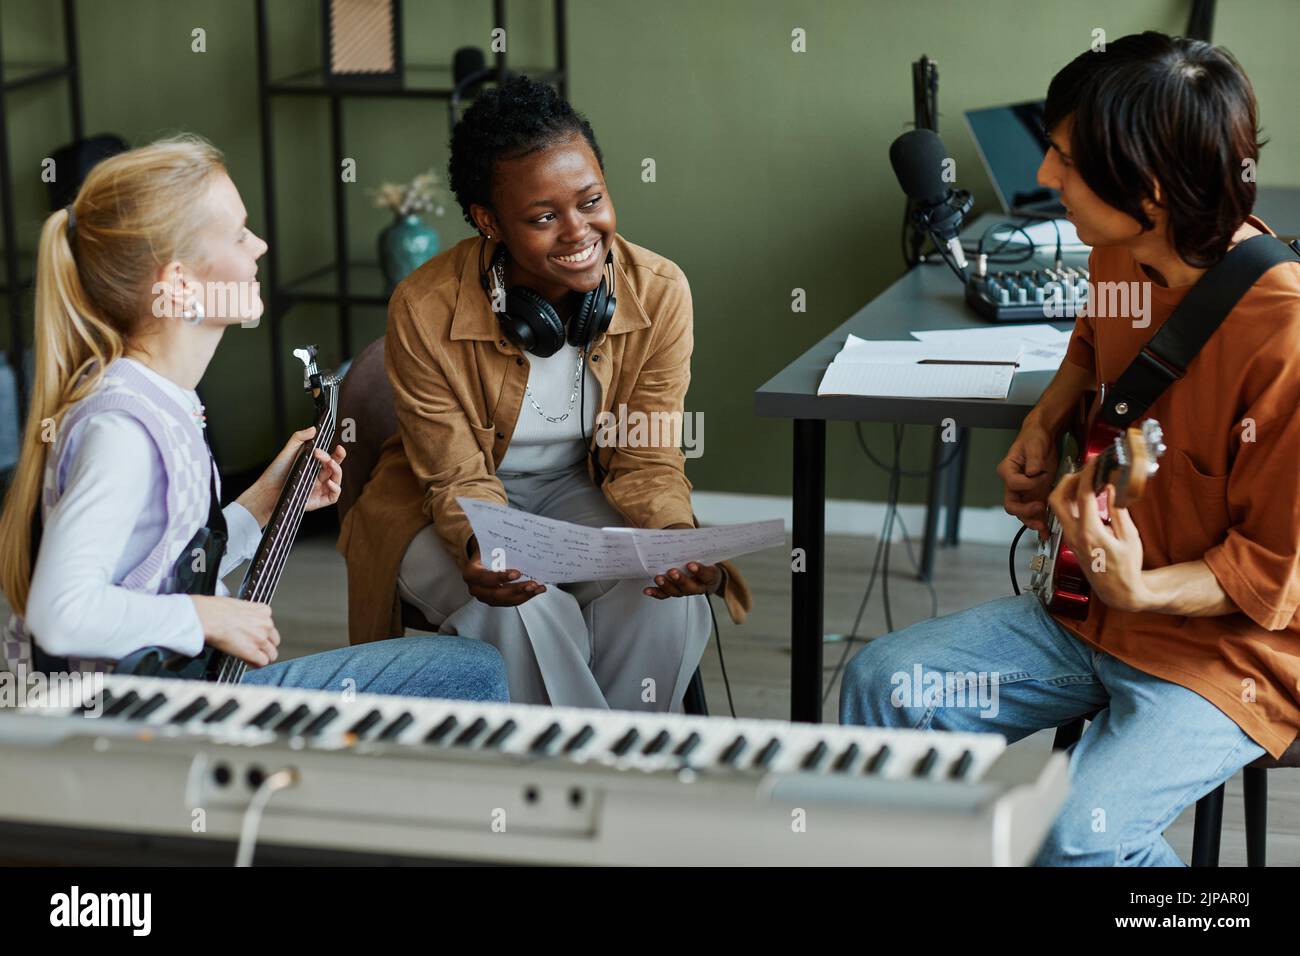 Portrait of three young musicians writing songs together, focus on black woman smiling happily and holding music sheet Stock Photo